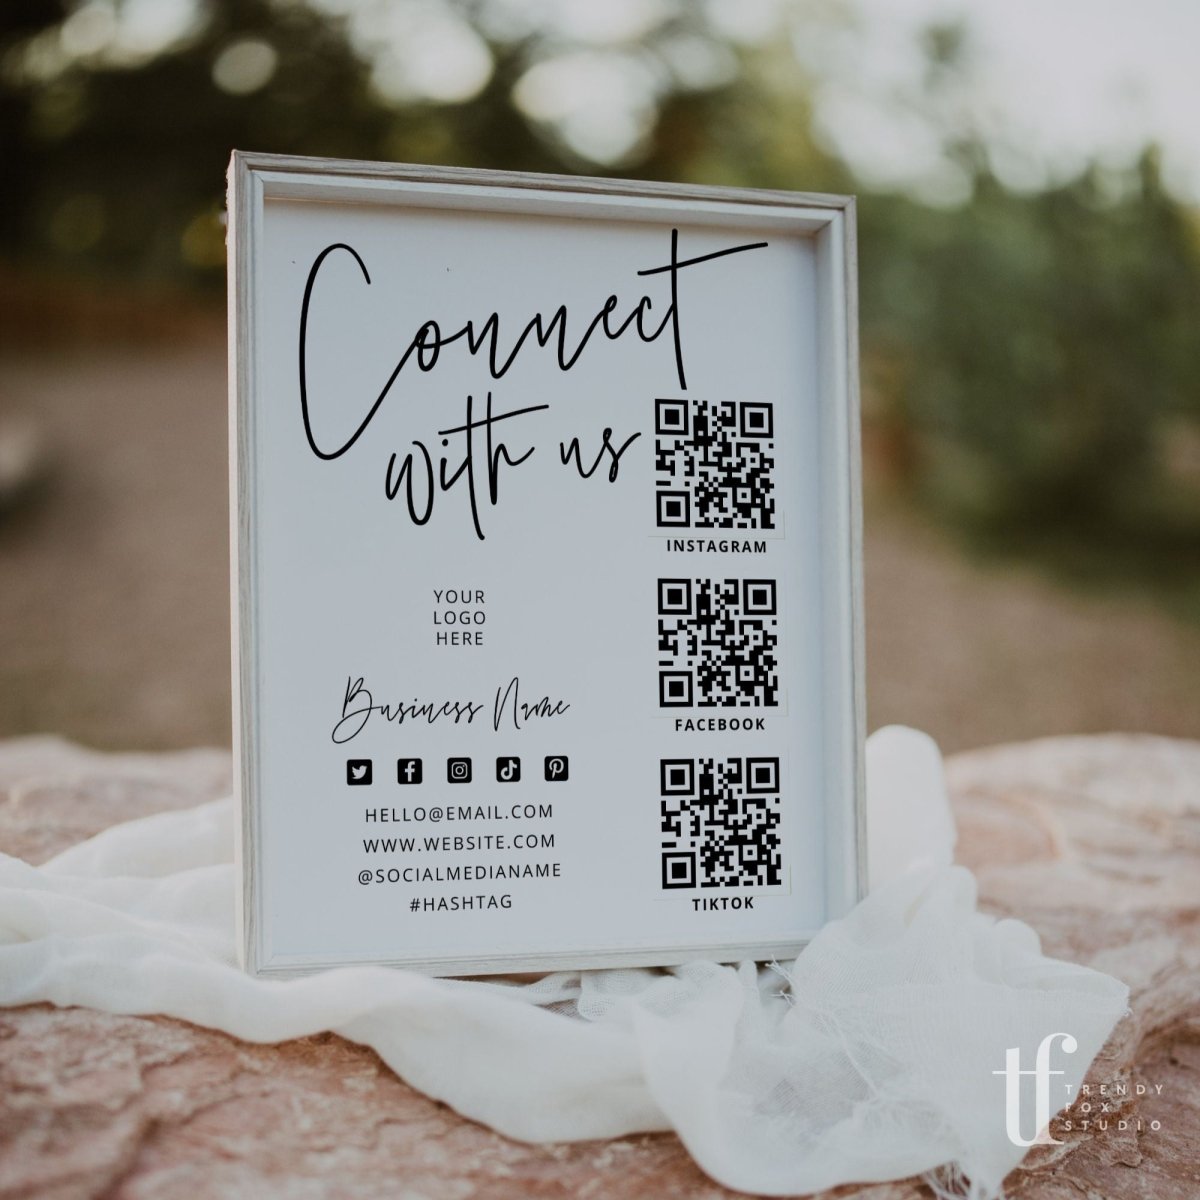 Social Media Connect With Us Sign Canva Template | Skye - Trendy Fox Studio